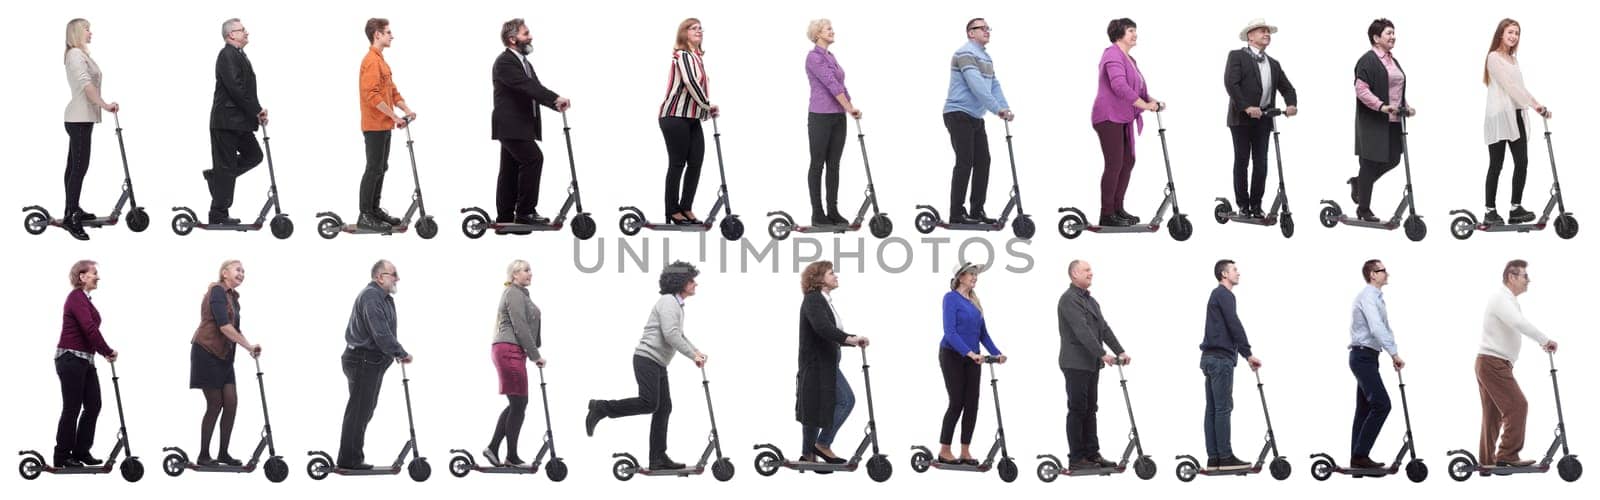 group of successful people on scooter isolated on white background